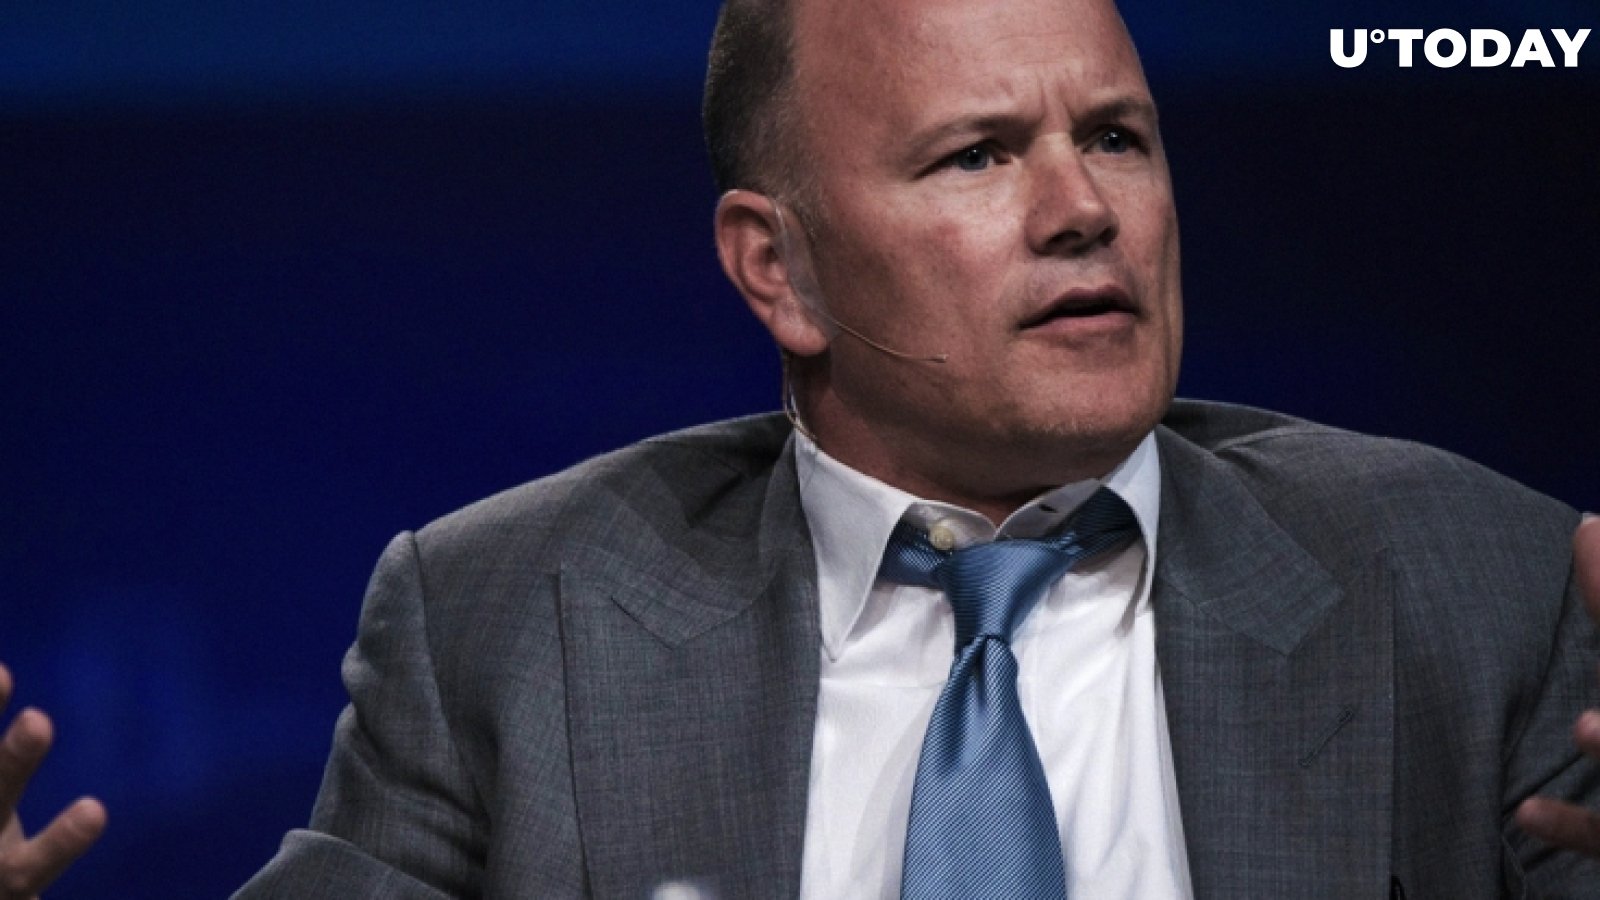 Every Major Bank Is Going to Have Crypto Trading Desk, Says Mike Novogratz